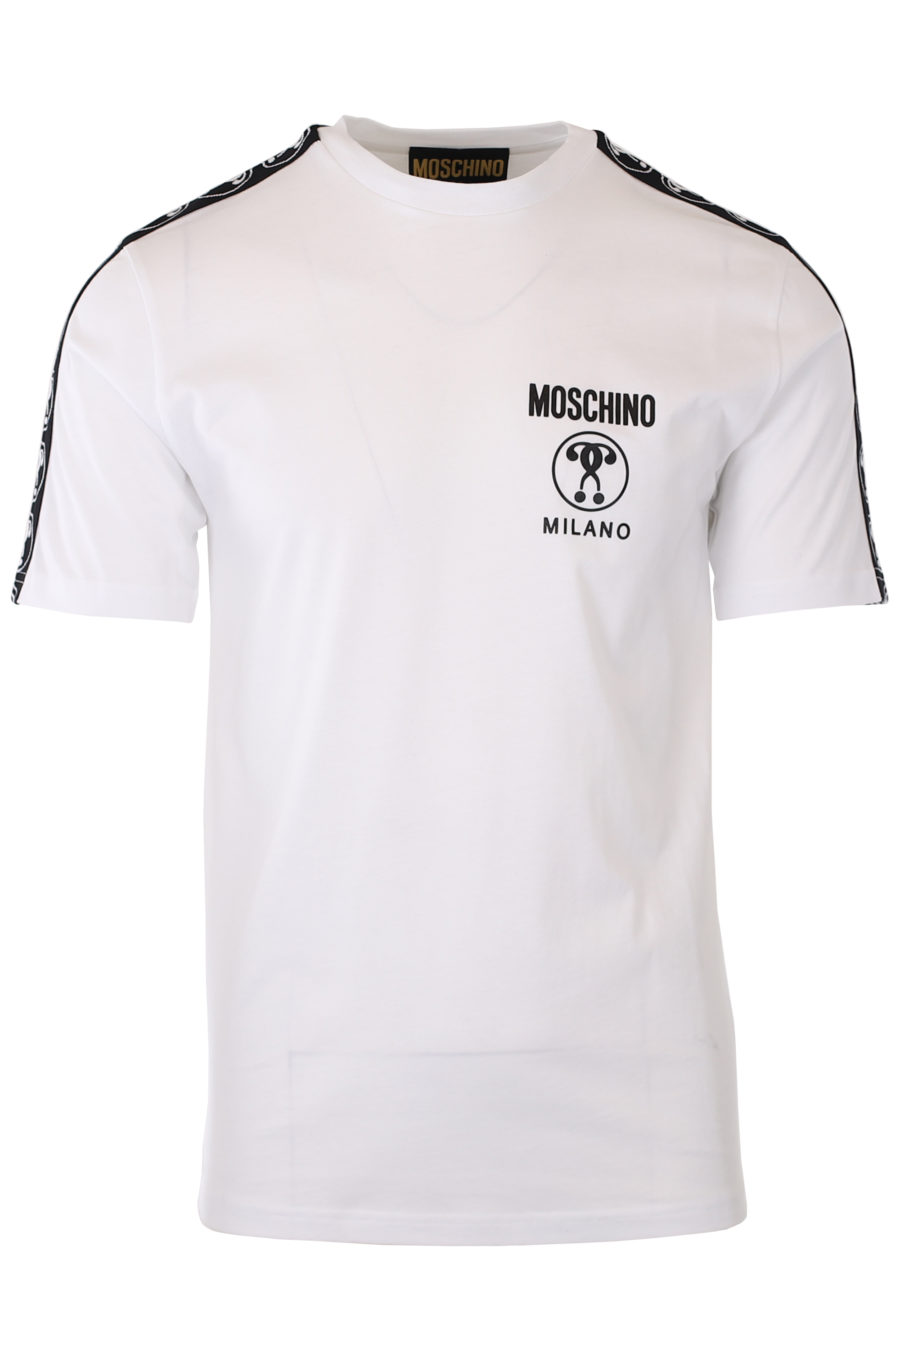 White T-shirt with small double question logo and tape on sleeves - IMG 9326